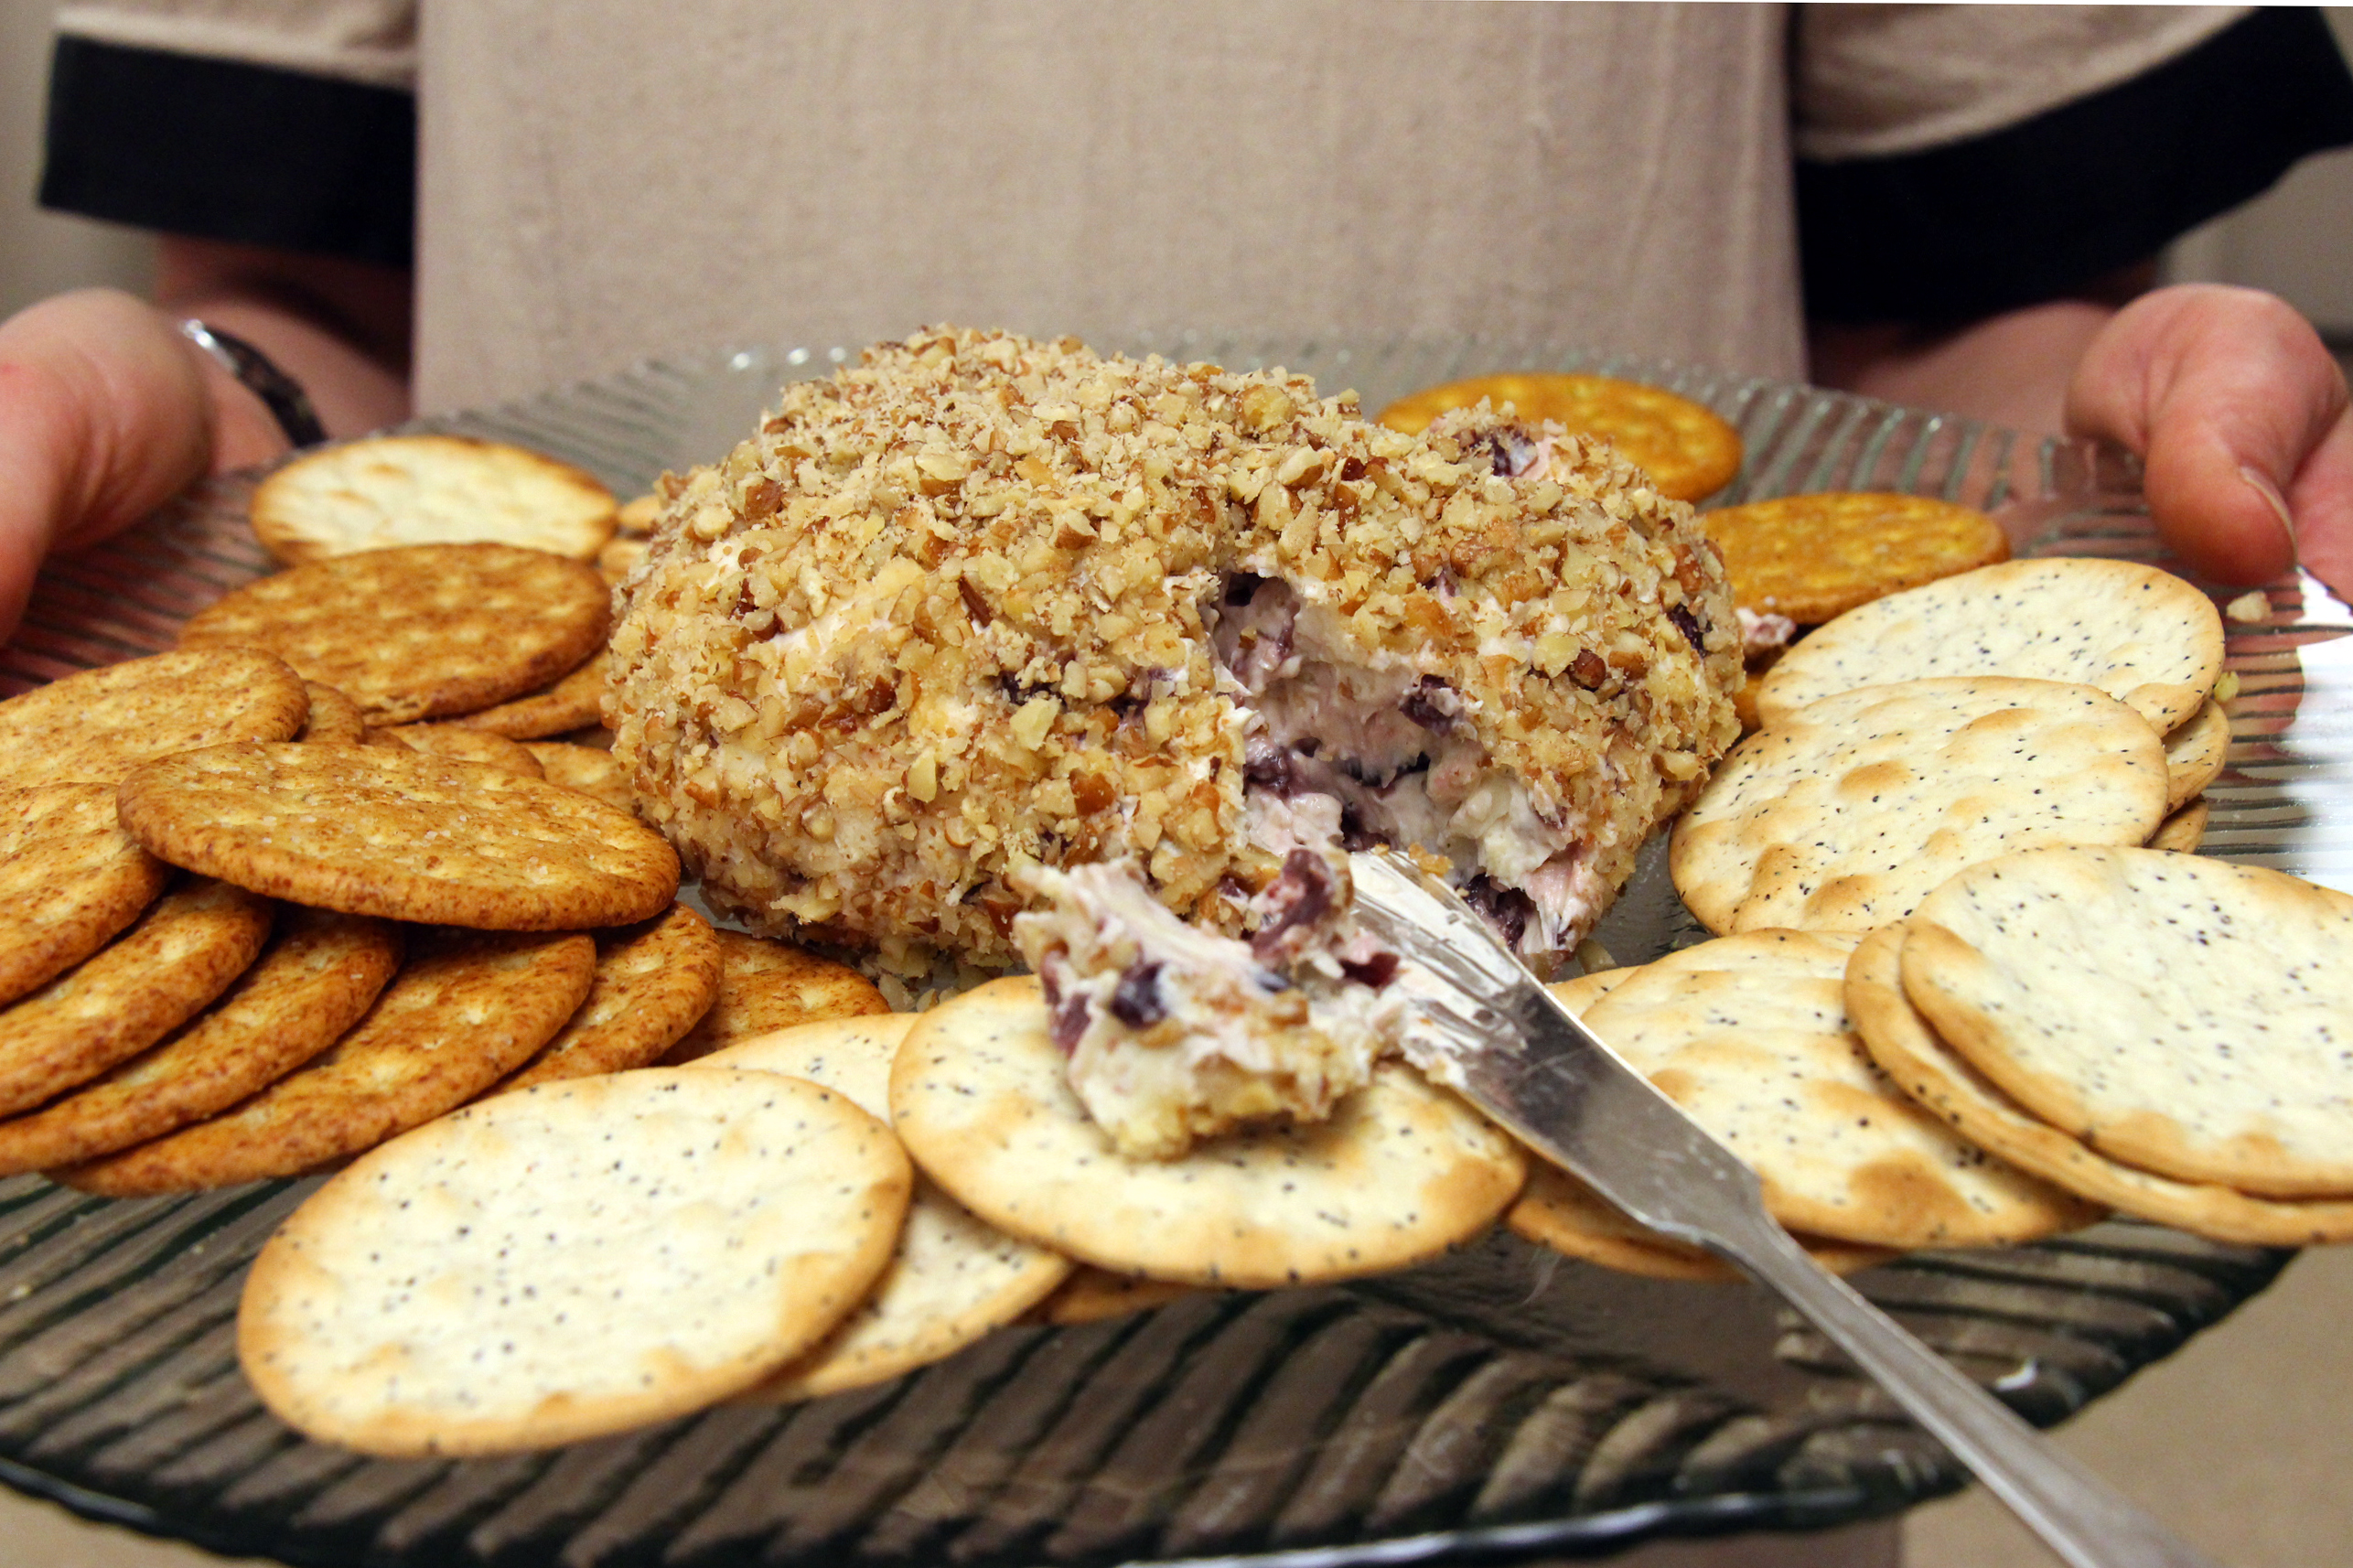 Cheddar/Parmesan Cheese Ball with port wine soaked craisins | Recipes from  a Monastery Kitchen